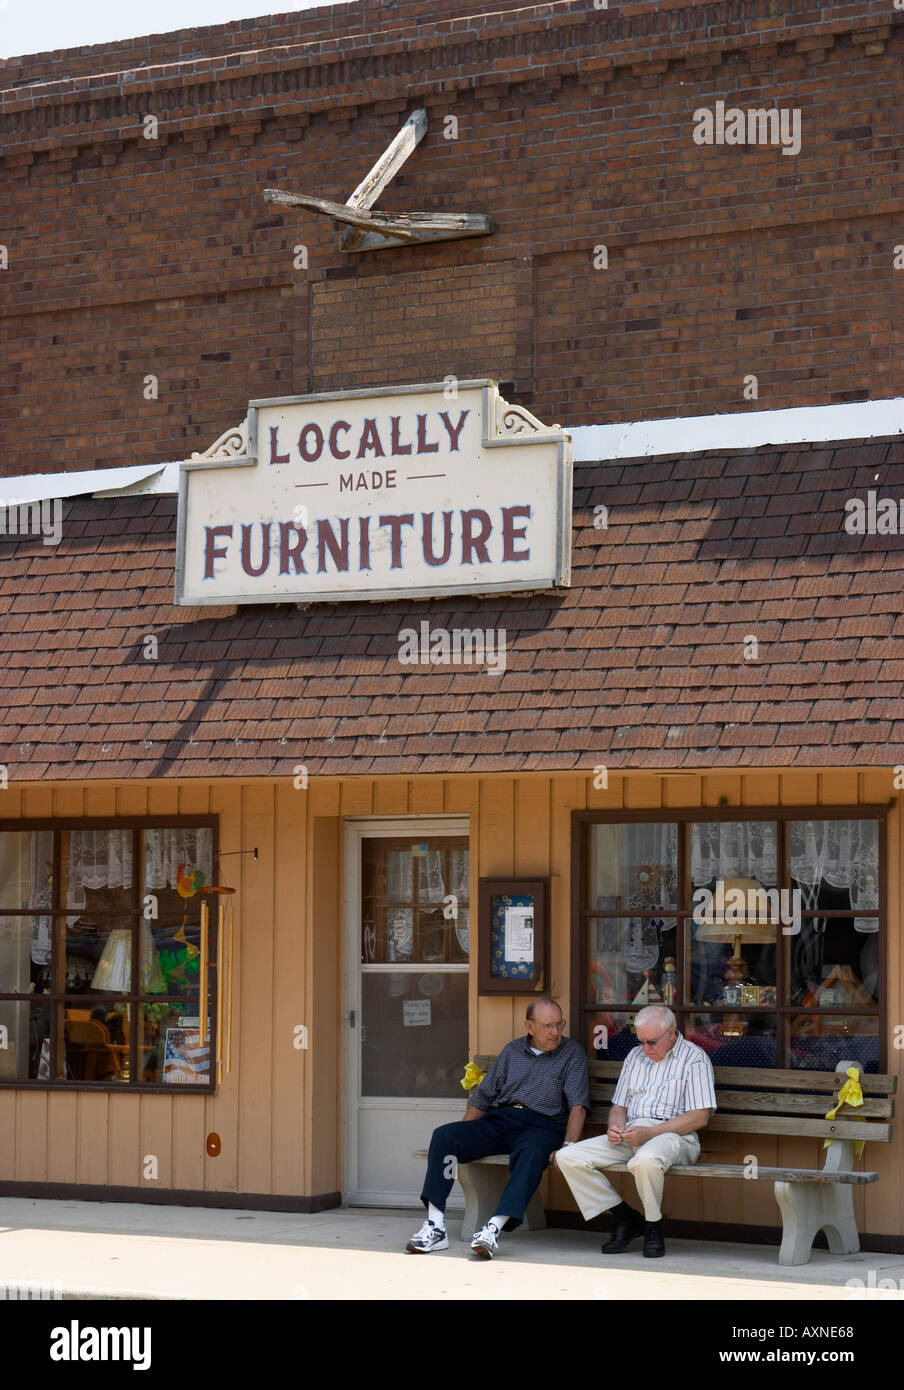 Illinois Arthur Two Men Sit Bench Outside Store Local Furniture